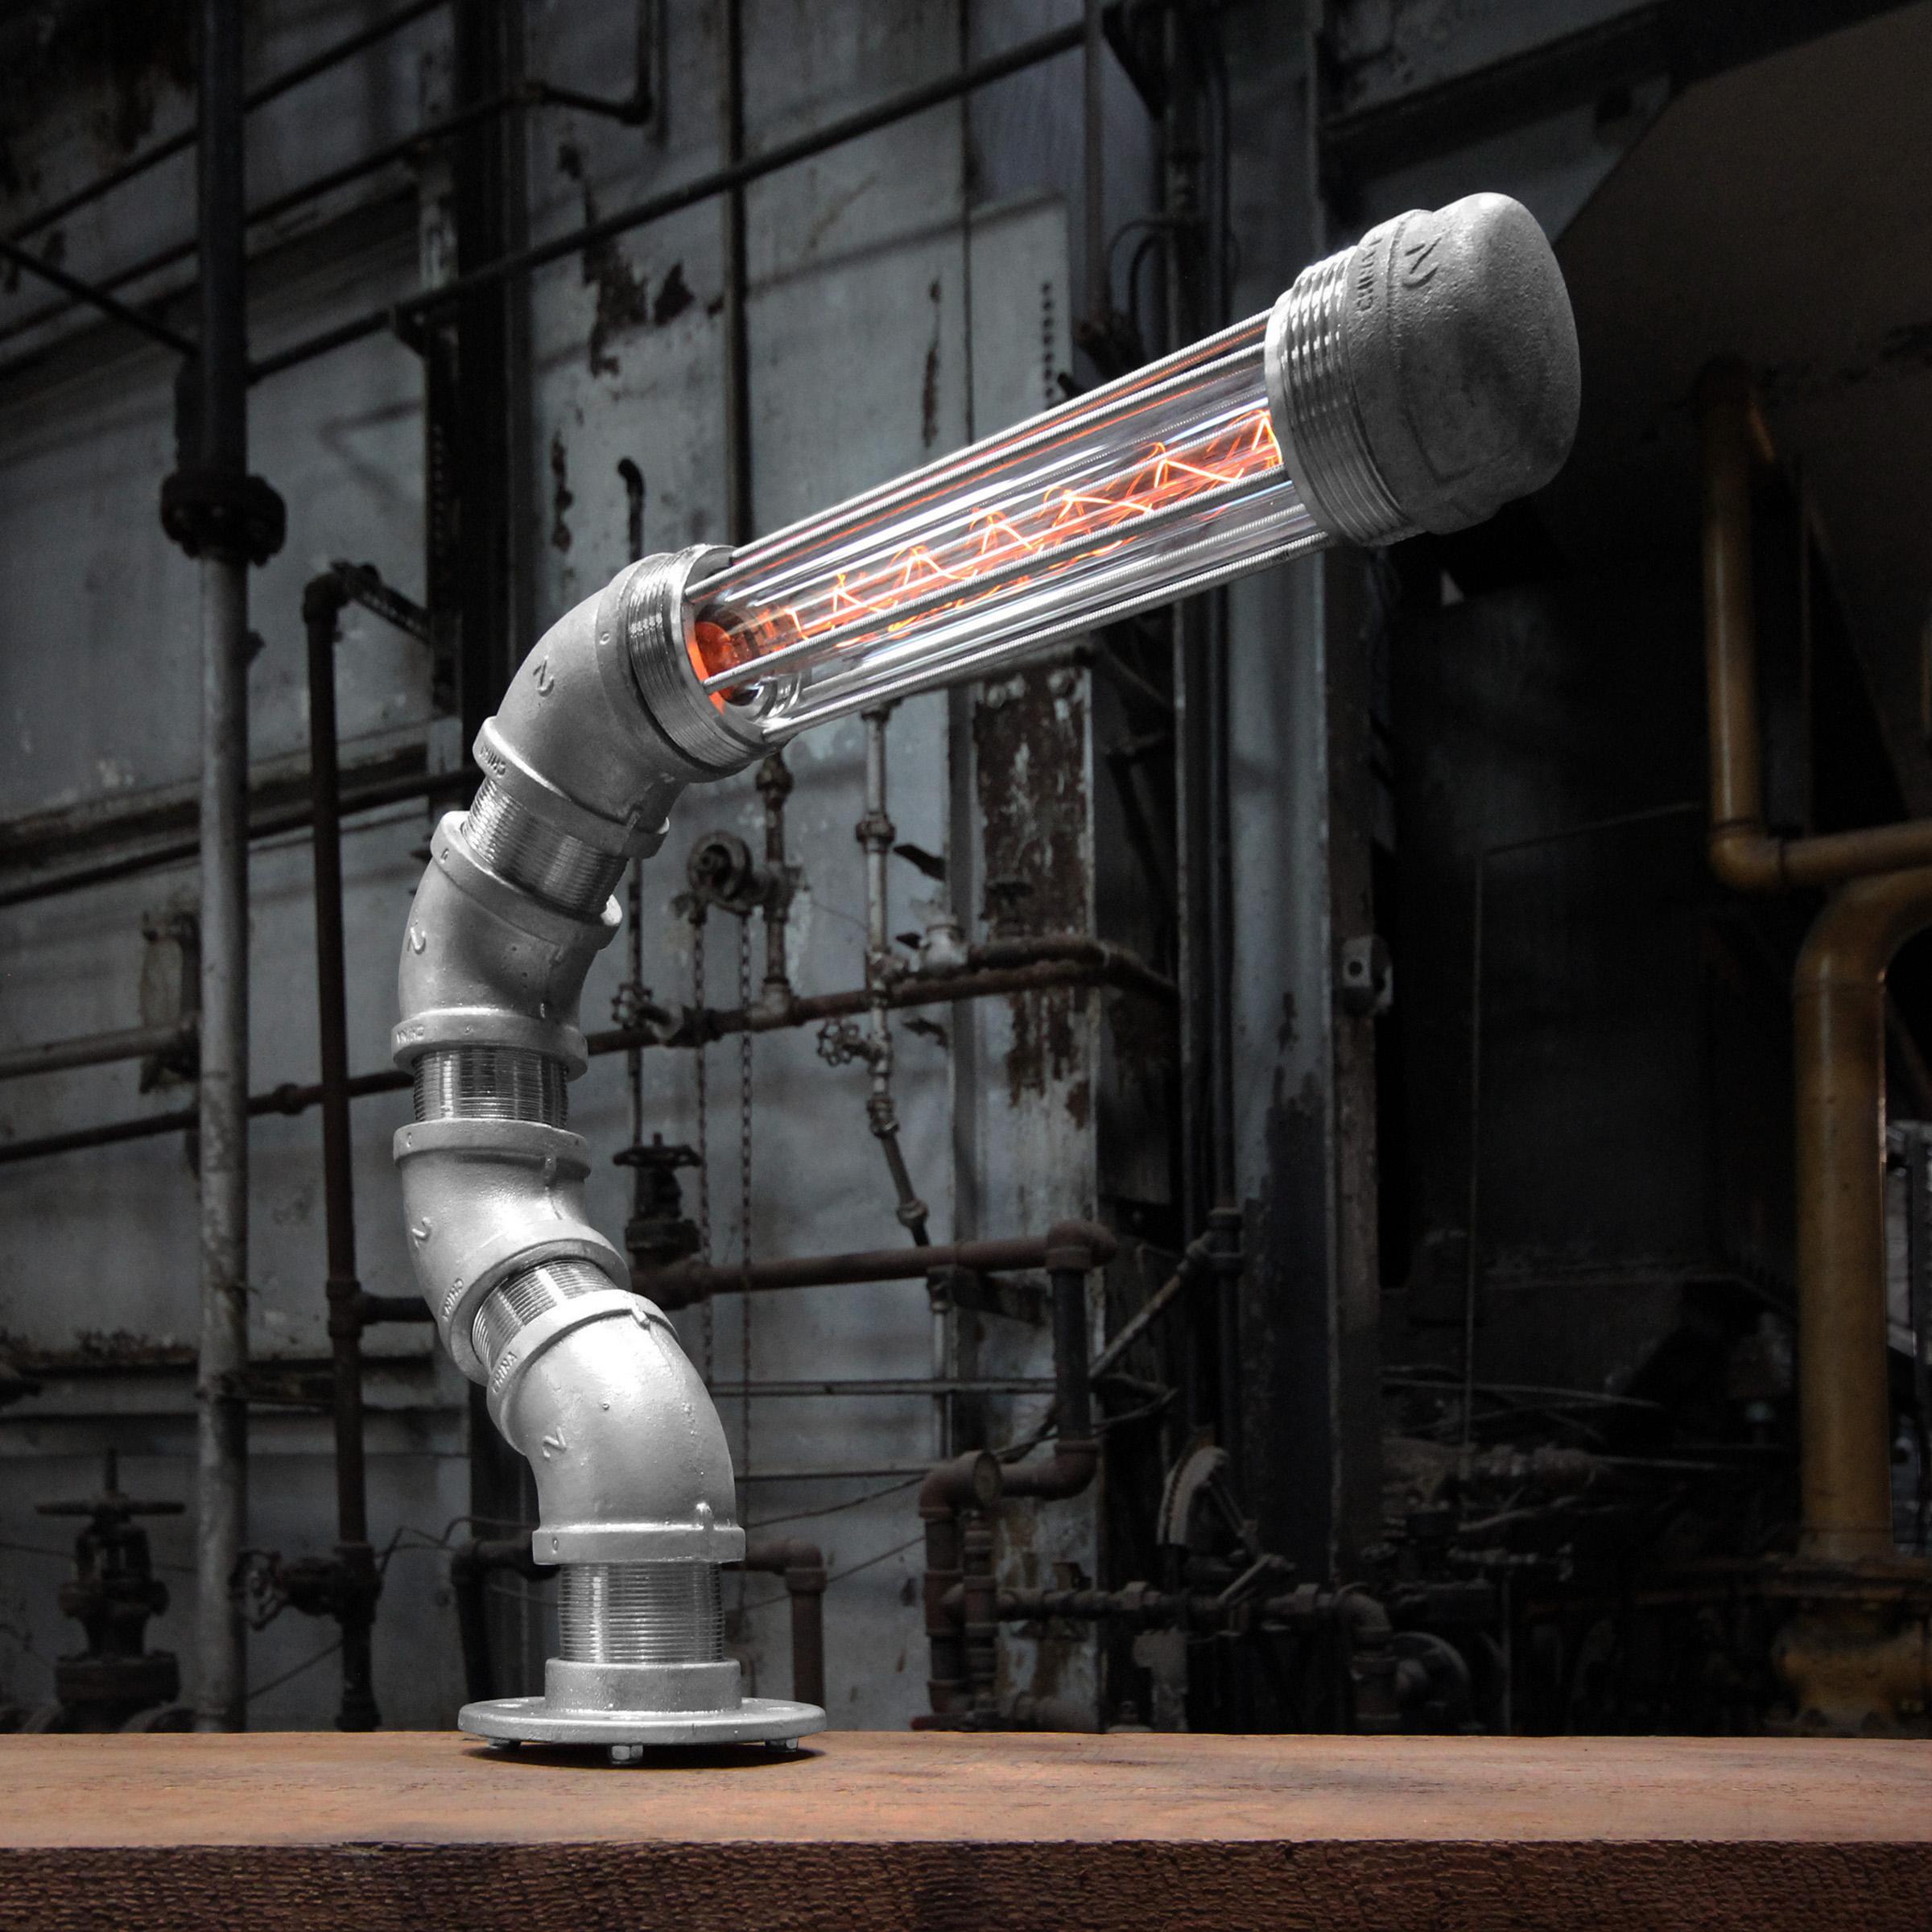 Galvanized Modern Industrial Table Lamp - Industrial Lamp - Industrial Light For Sale